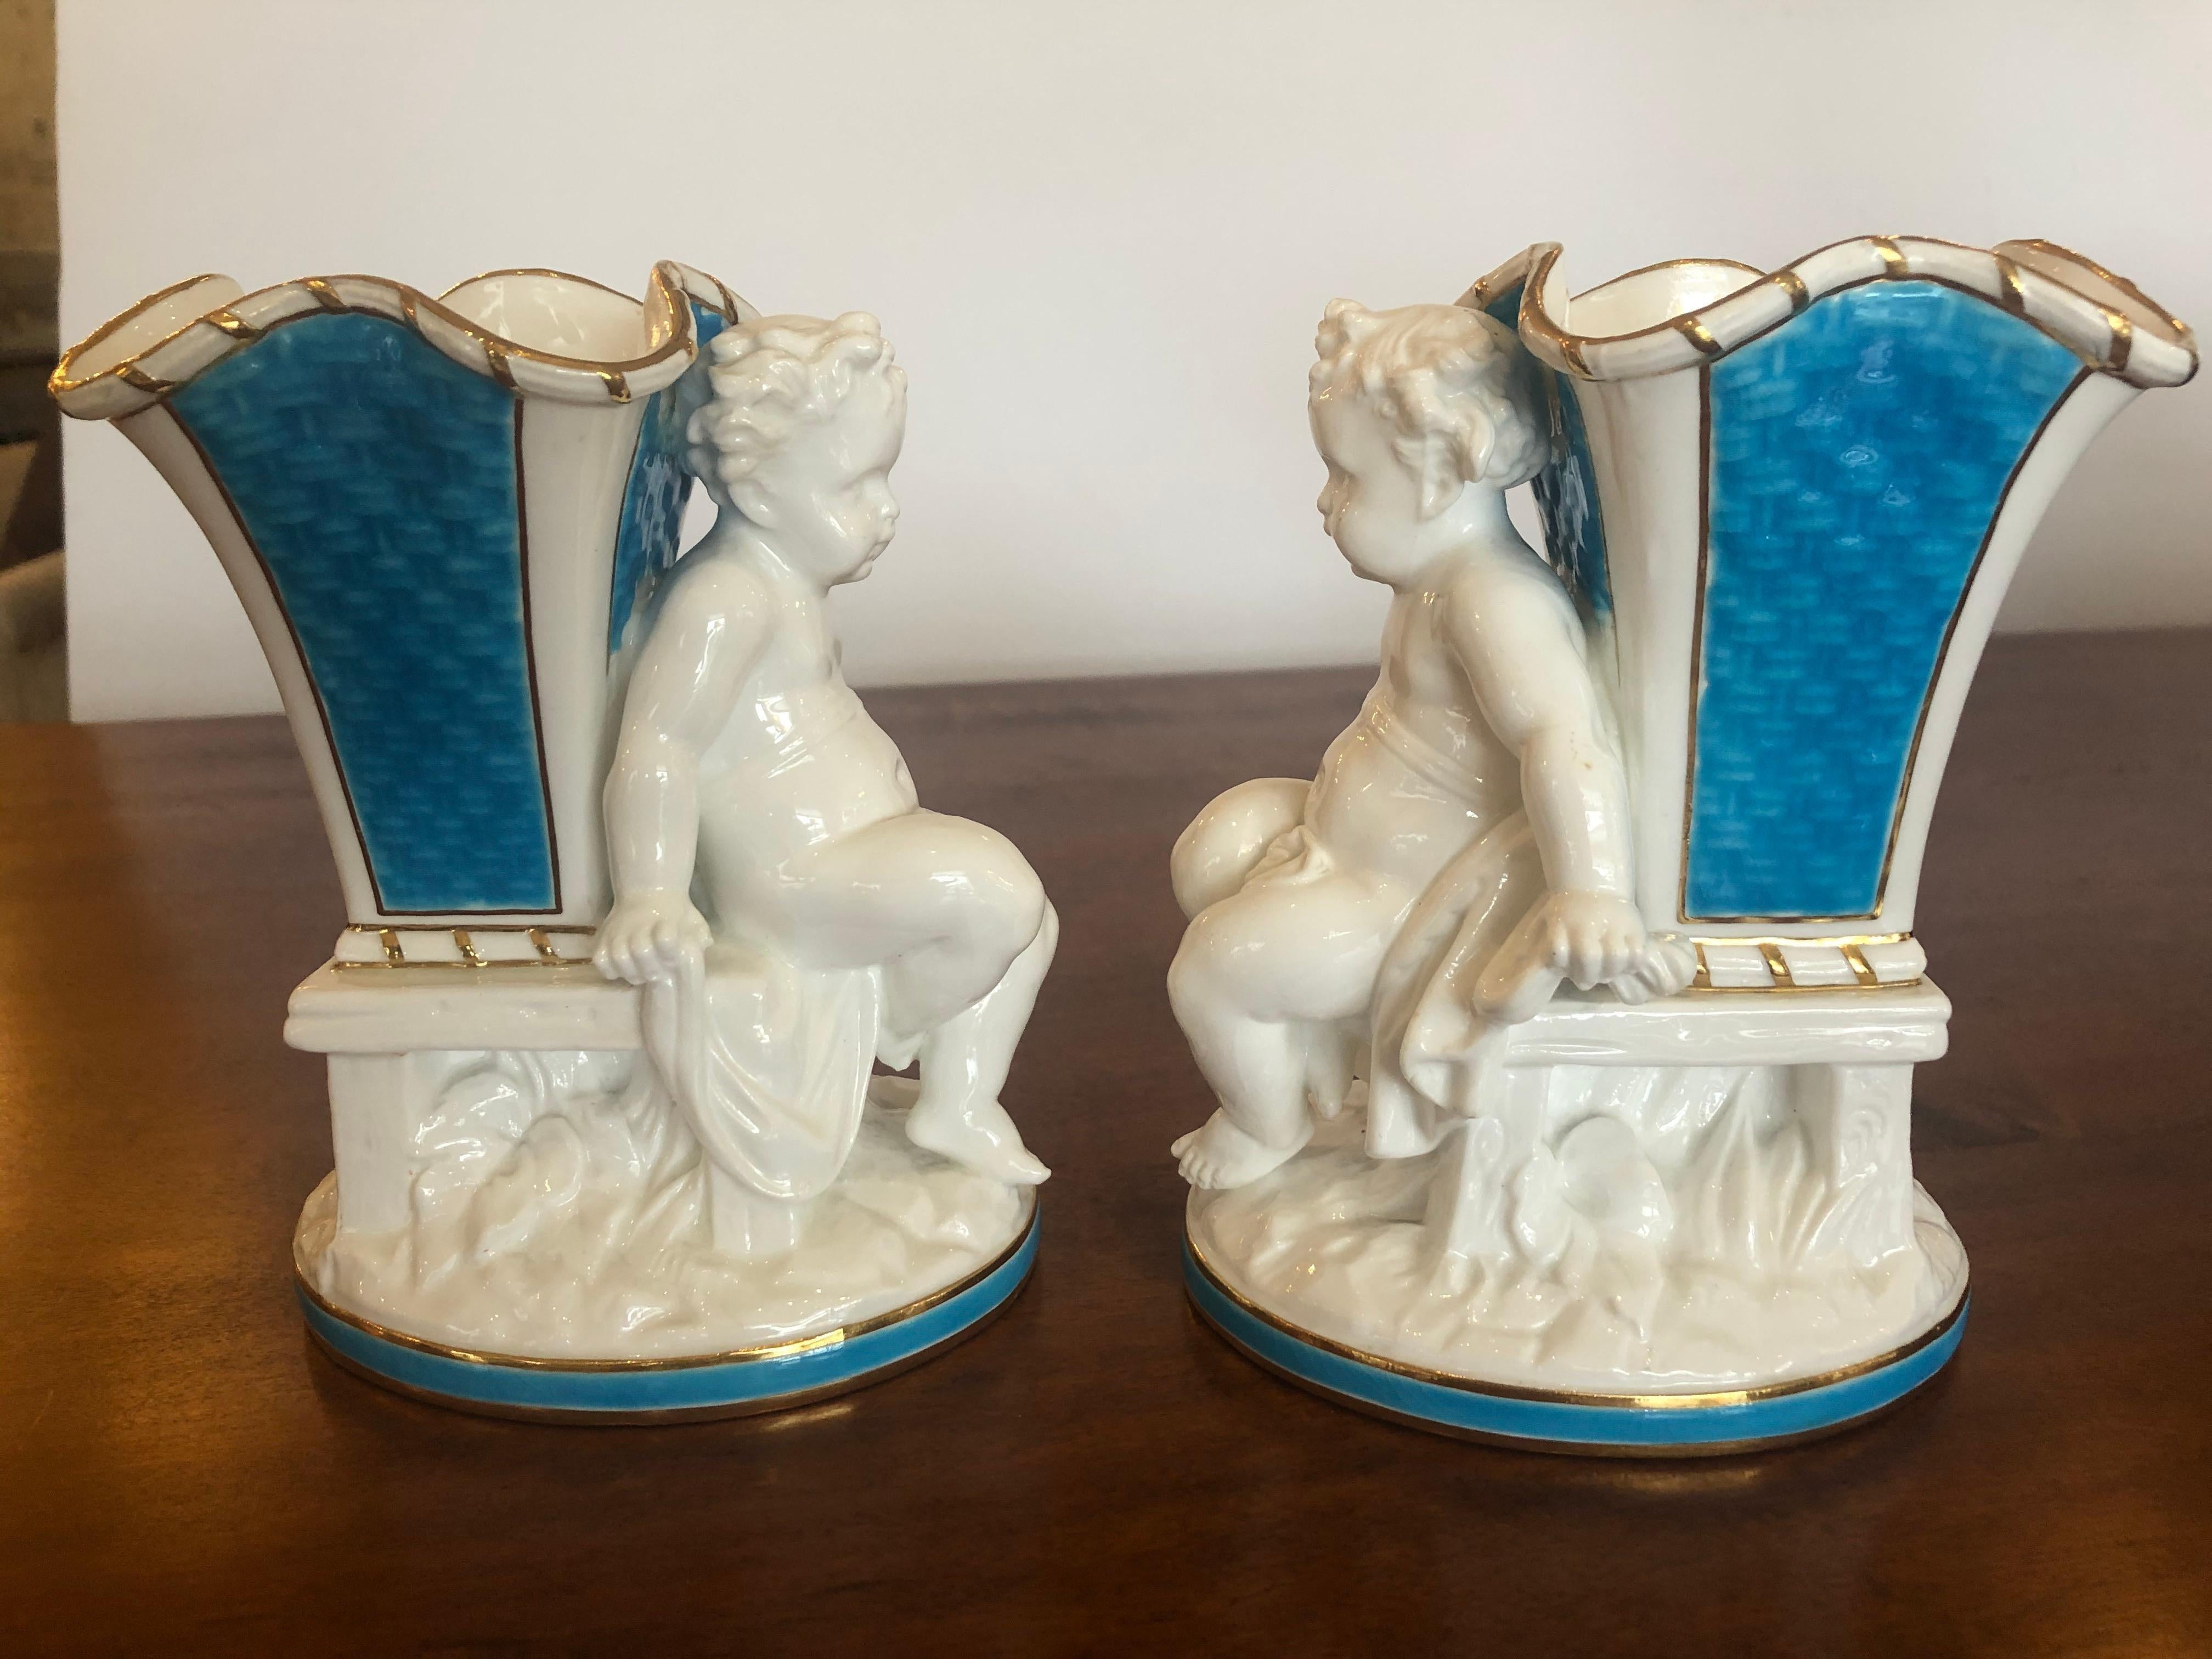 A sublime pair of porcelain spill vases having scalloped edges, gold leaf, eye catching Tiffany blue patterned decoration, and seated cherubs. Marked on bottoms, England, Caldwell & Philadelphia.
   